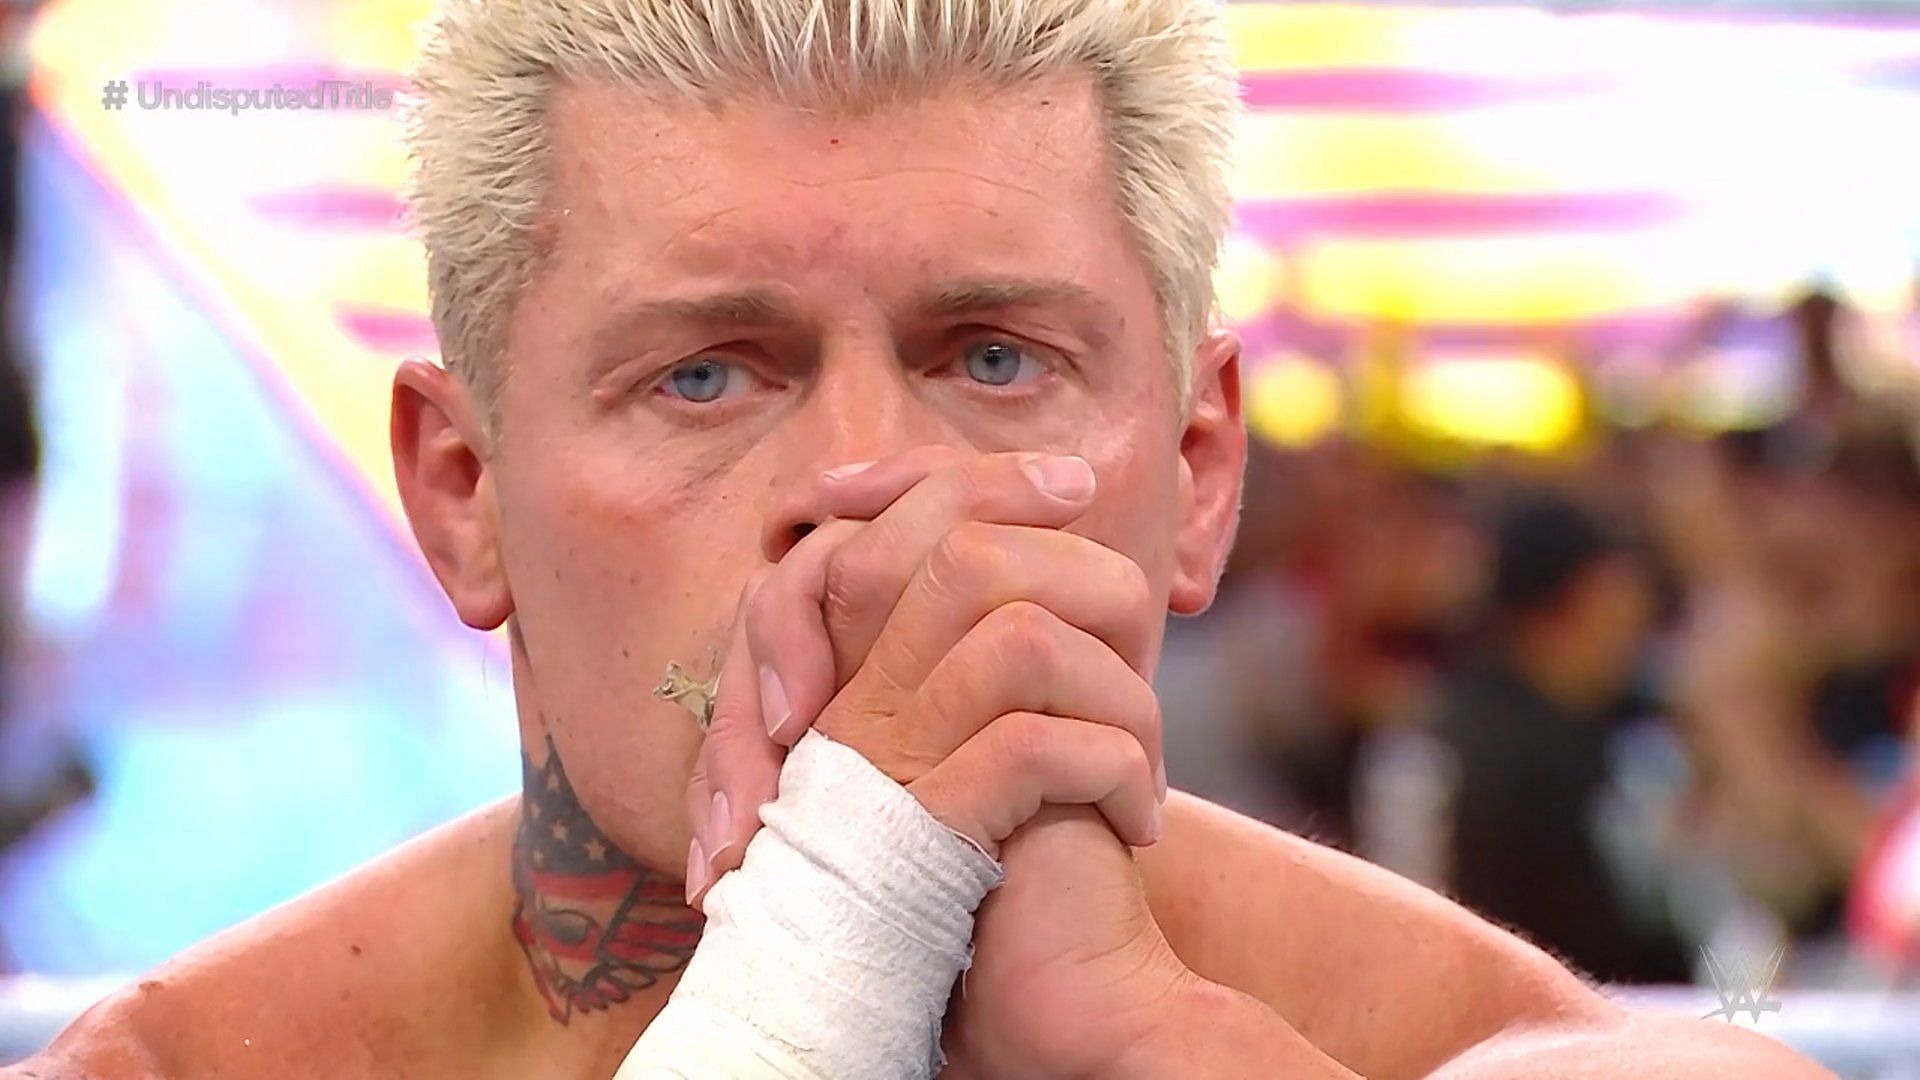 Cody Rhodes is not on the best of terms with the top star